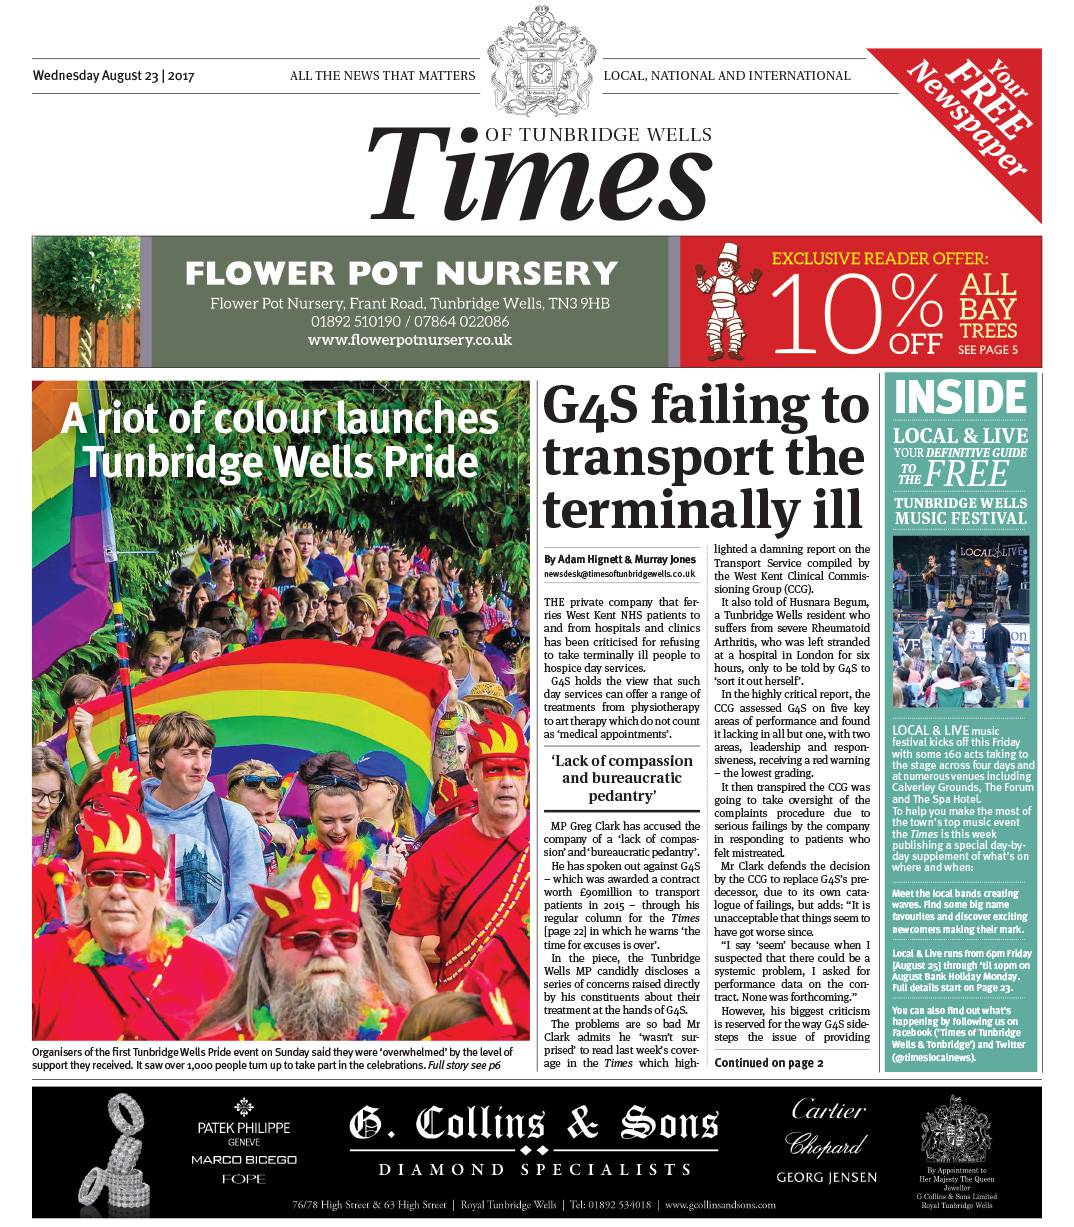 Read the Times of Tunbridge Wells 23rd August 2017